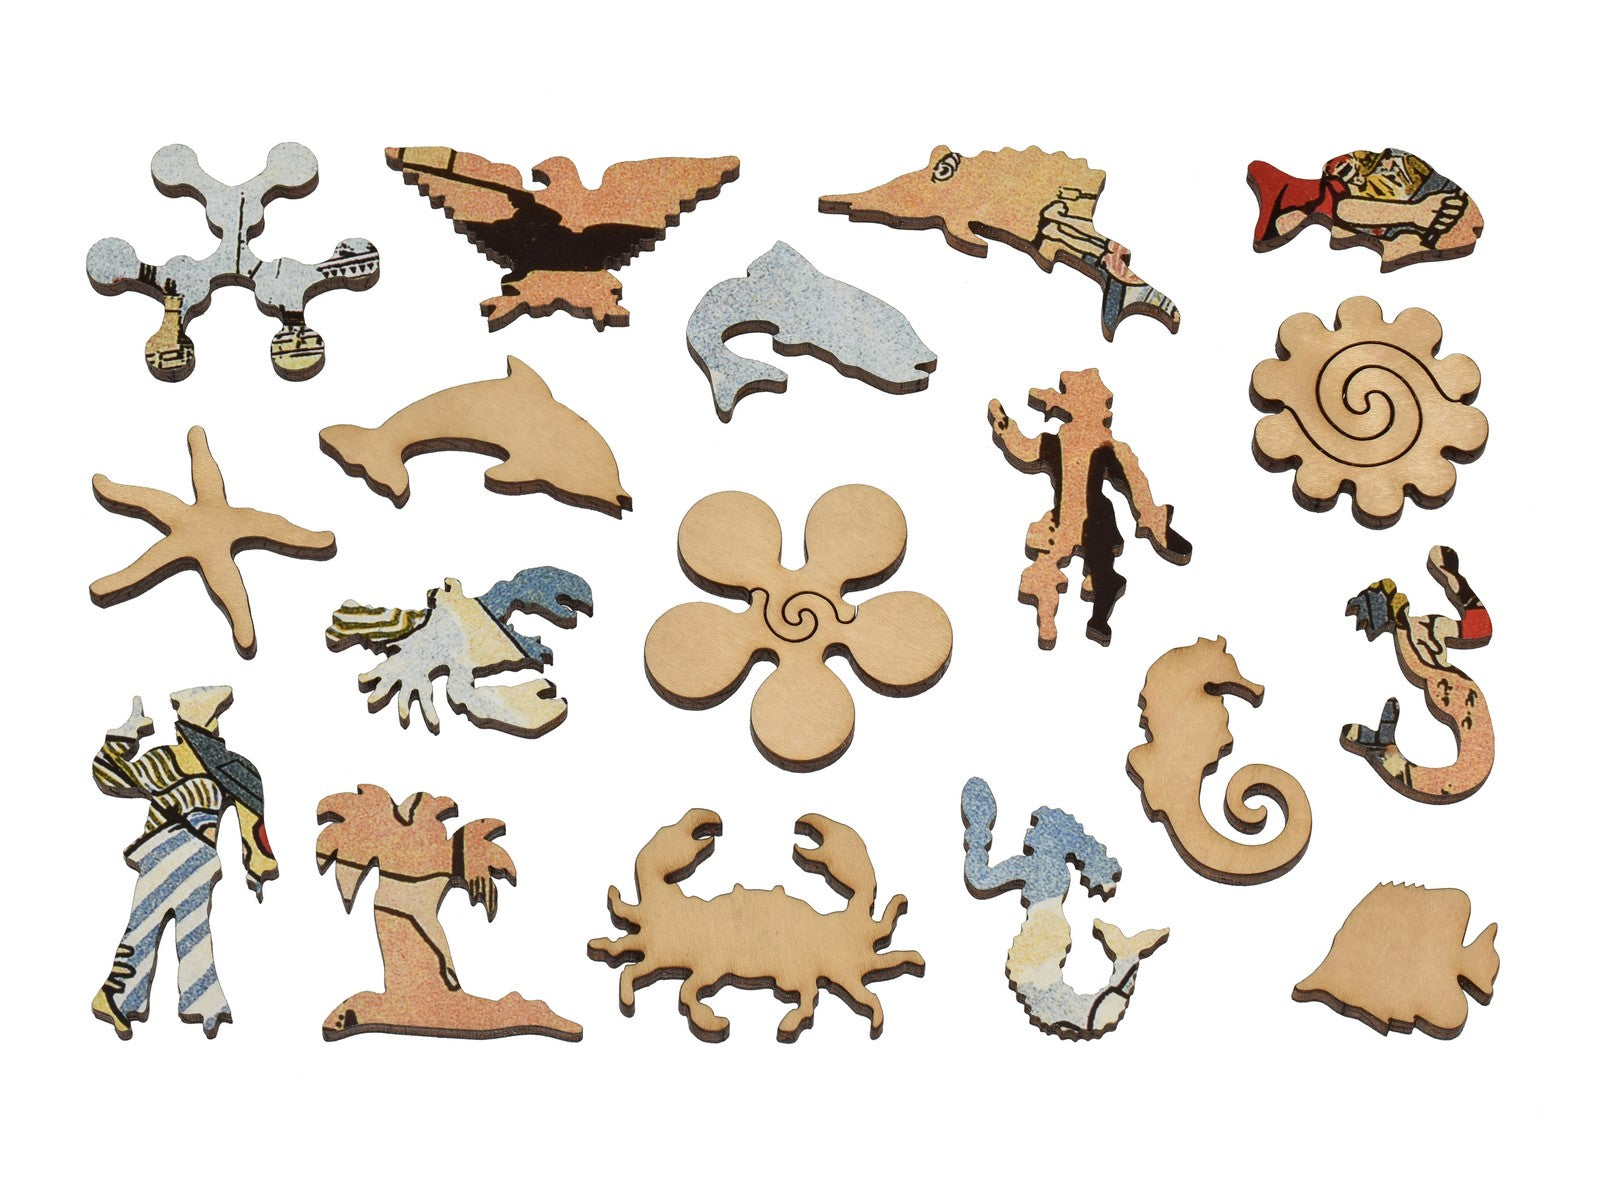 The whimsy pieces that can be found in the puzzle, Sand Castles.